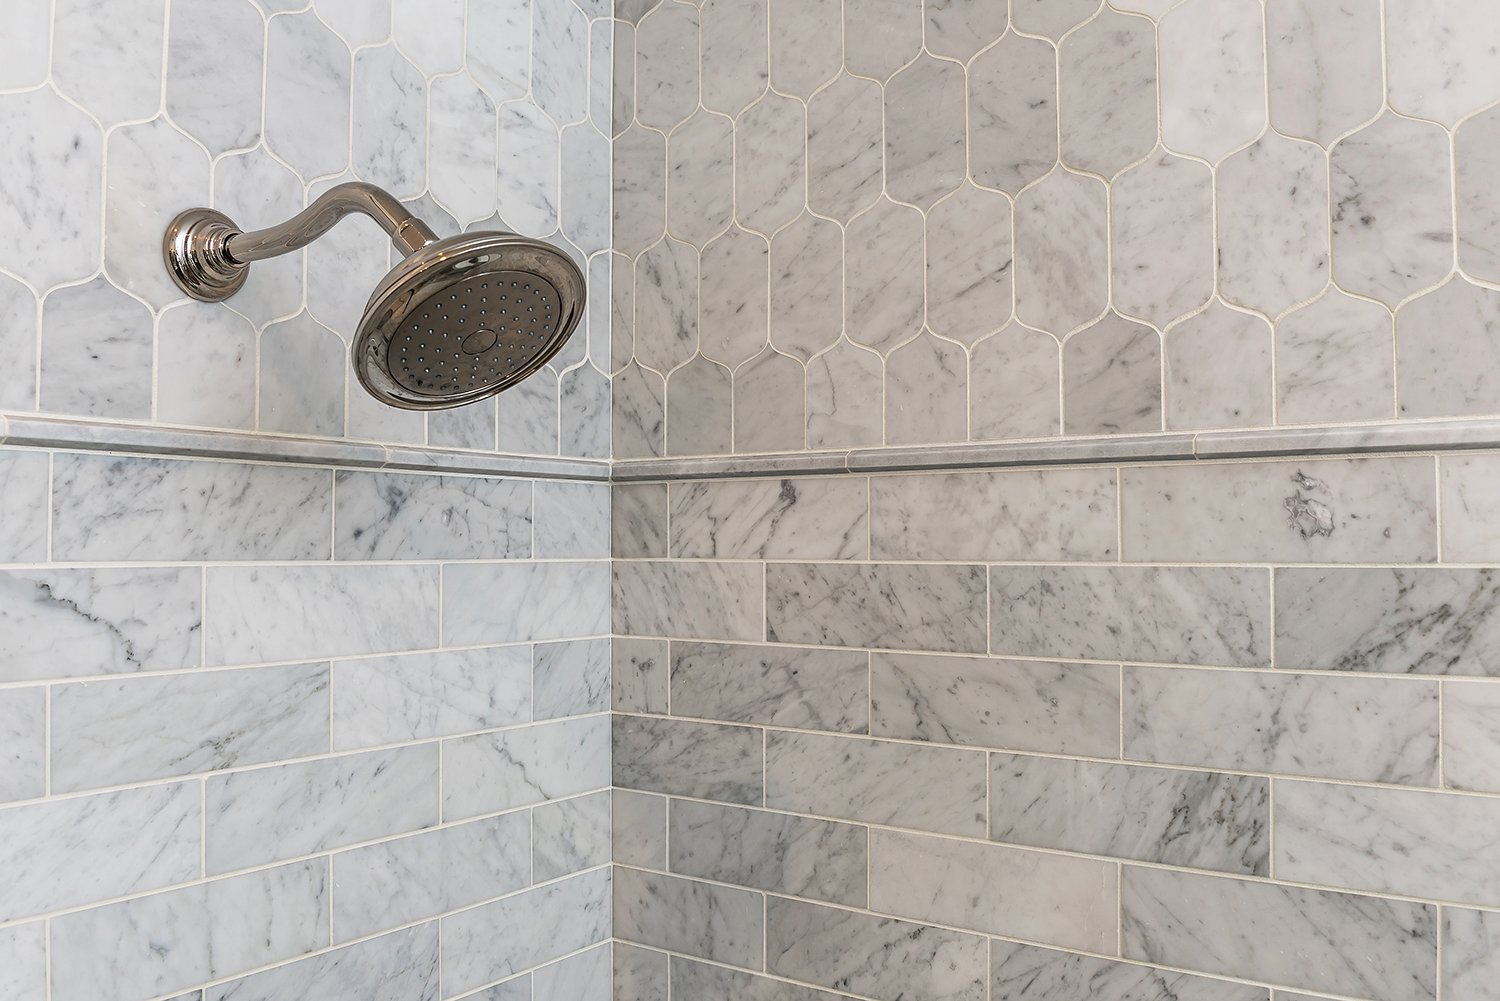  A close up of a tiled shower with a silver shower-head.  